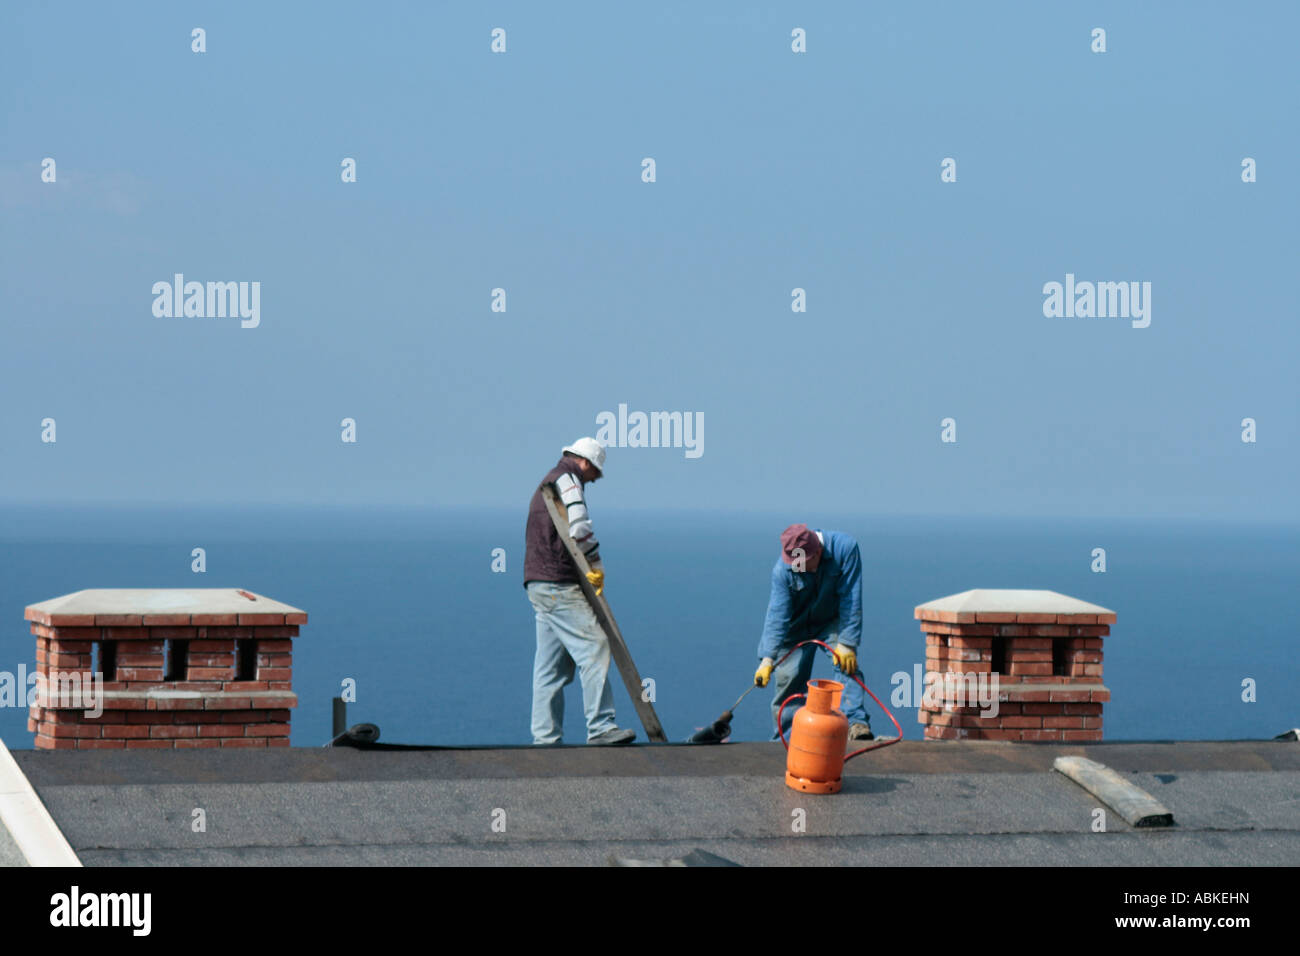 Men working on roof in sunny Dubrovnic, Croatia Stock Photo